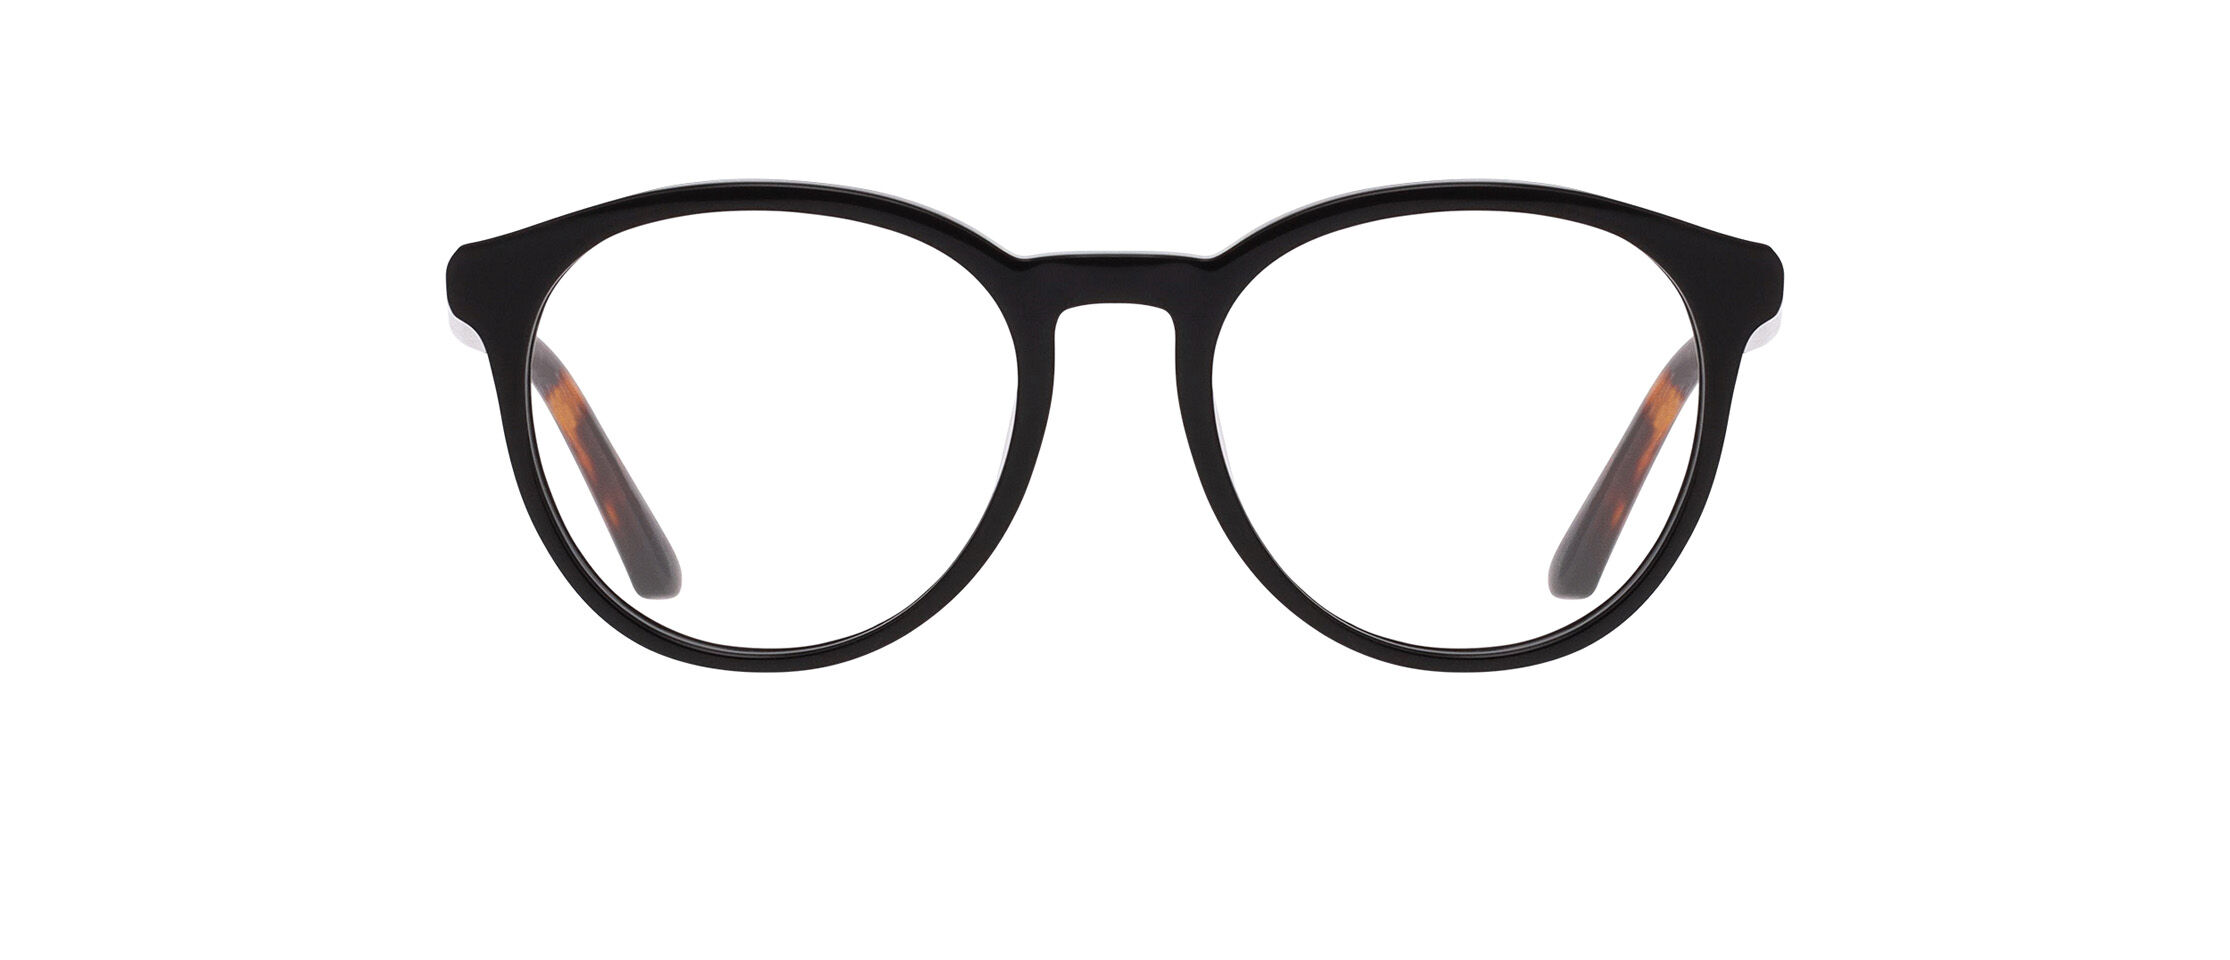 Calvin Klein CK22546 Glasses | Free Shipping and Returns | Eyeconic